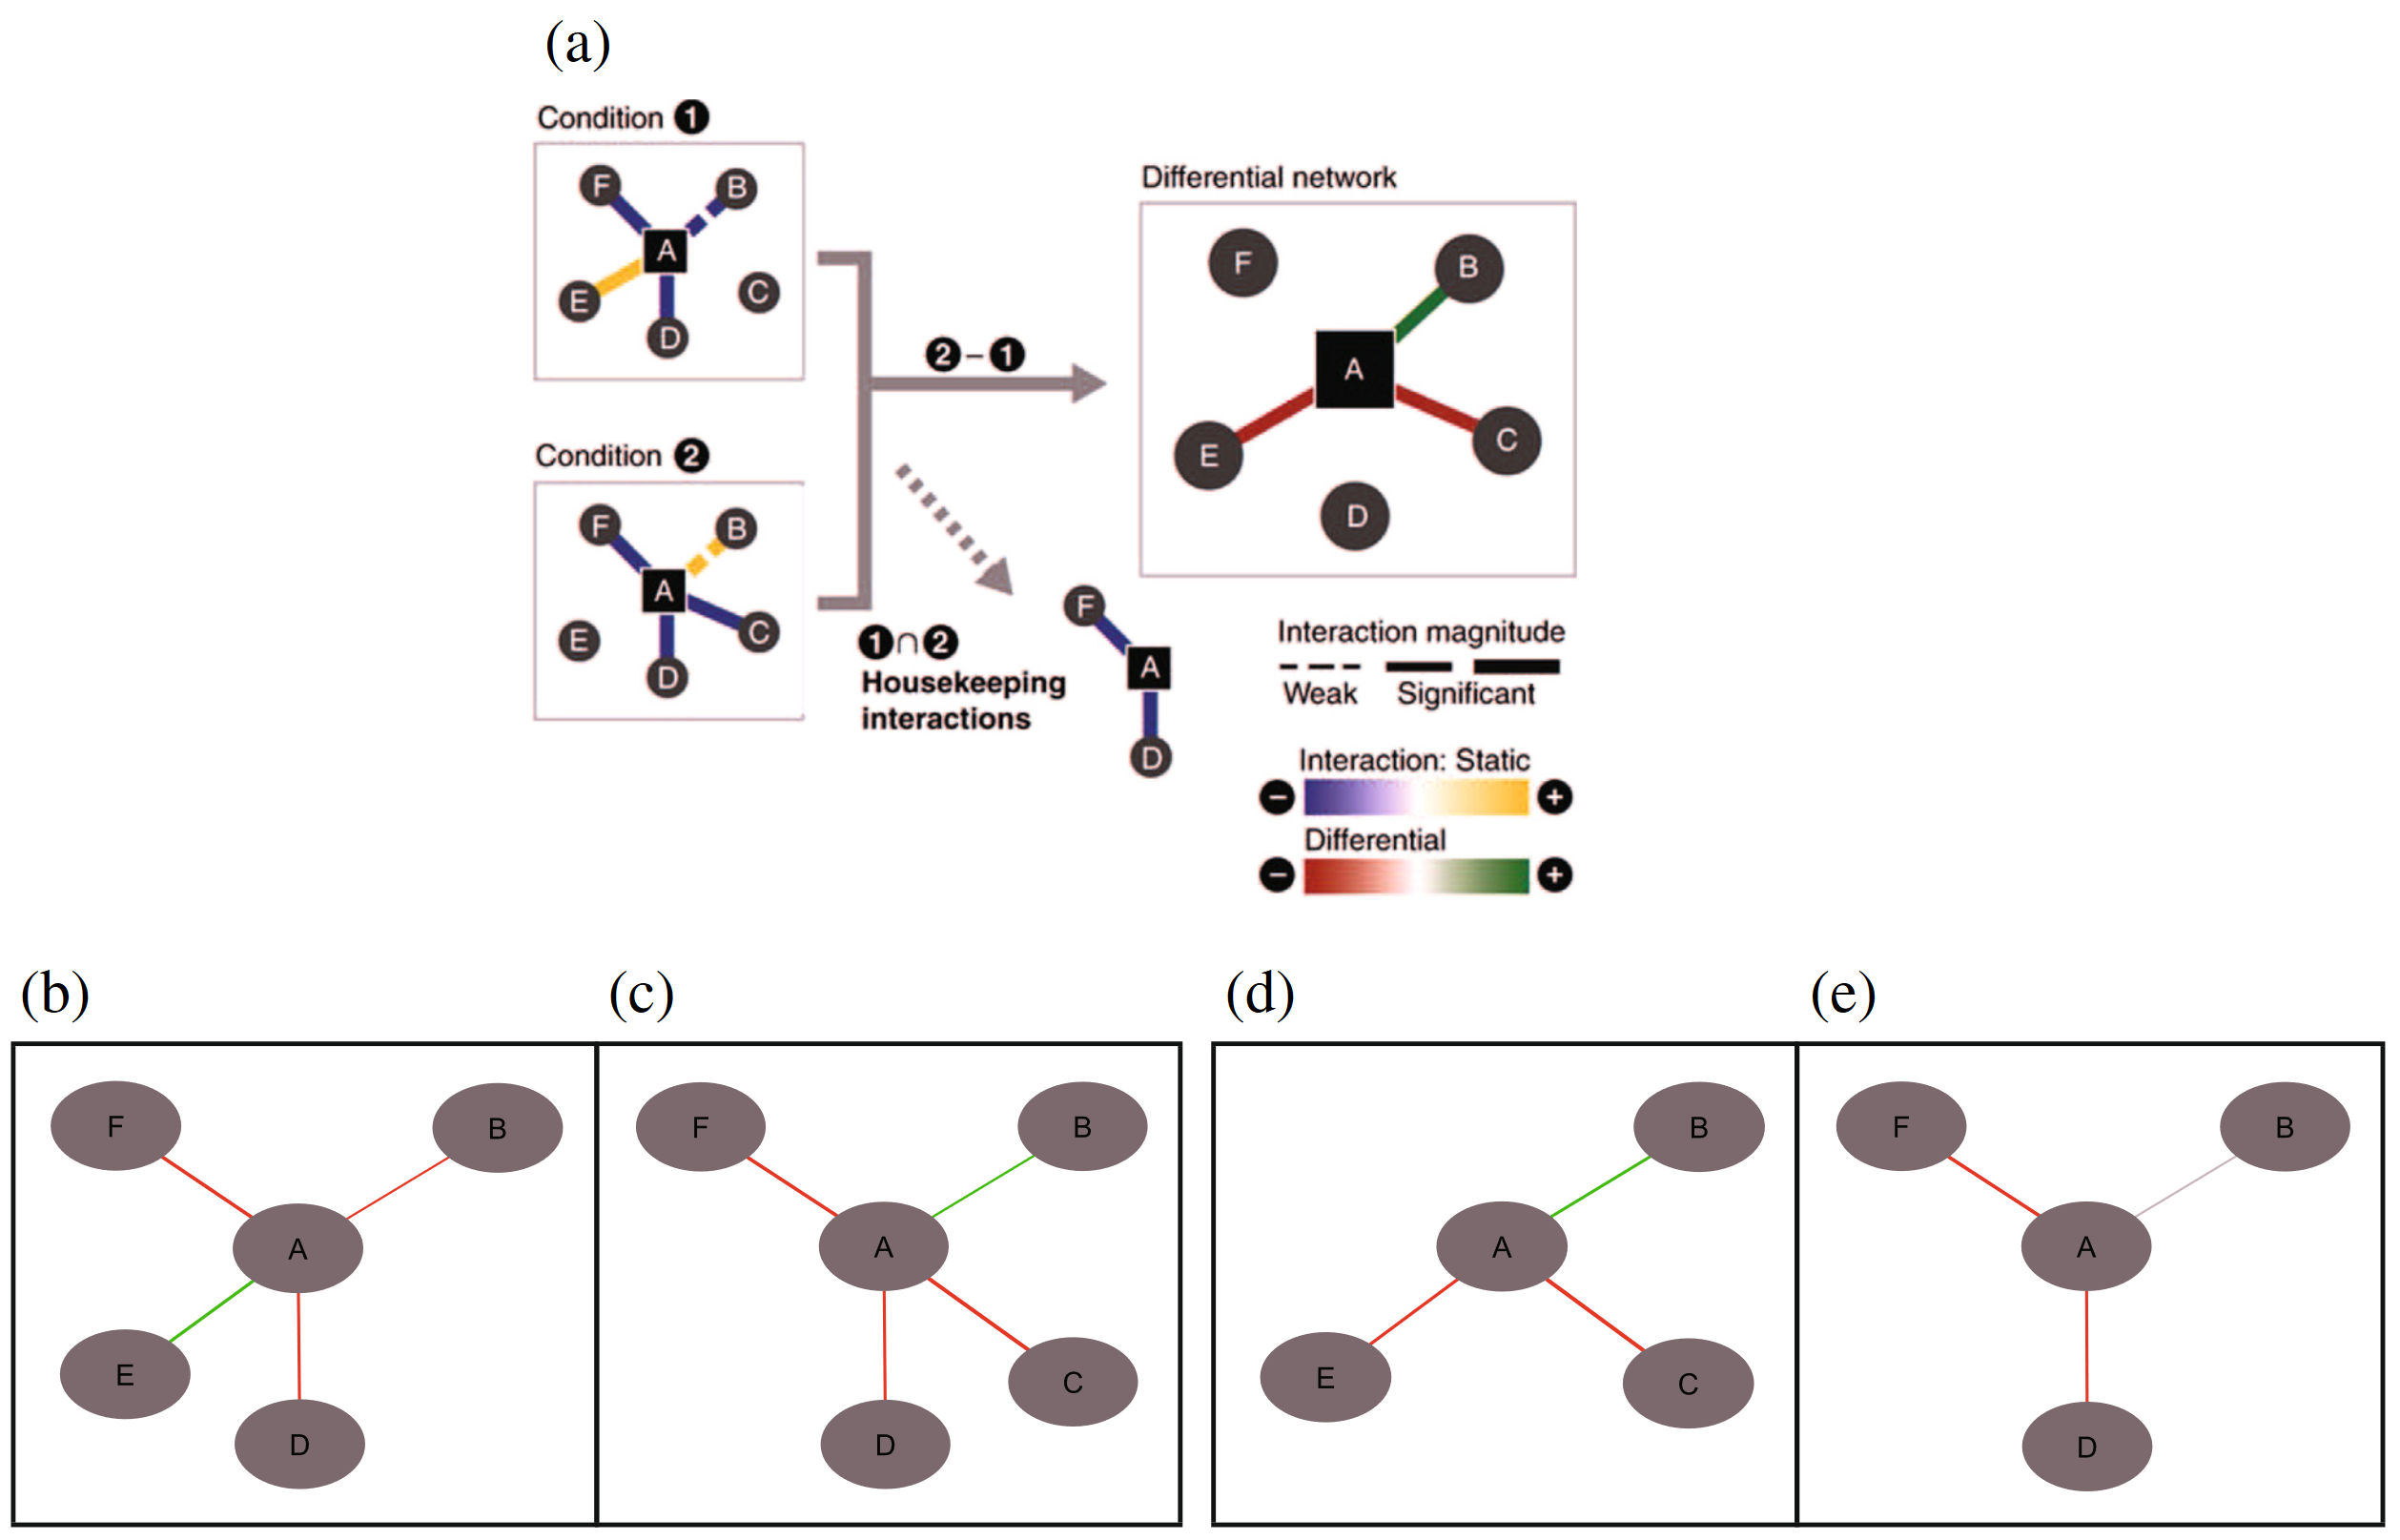 Figure from the paper, showing how differential networks work.